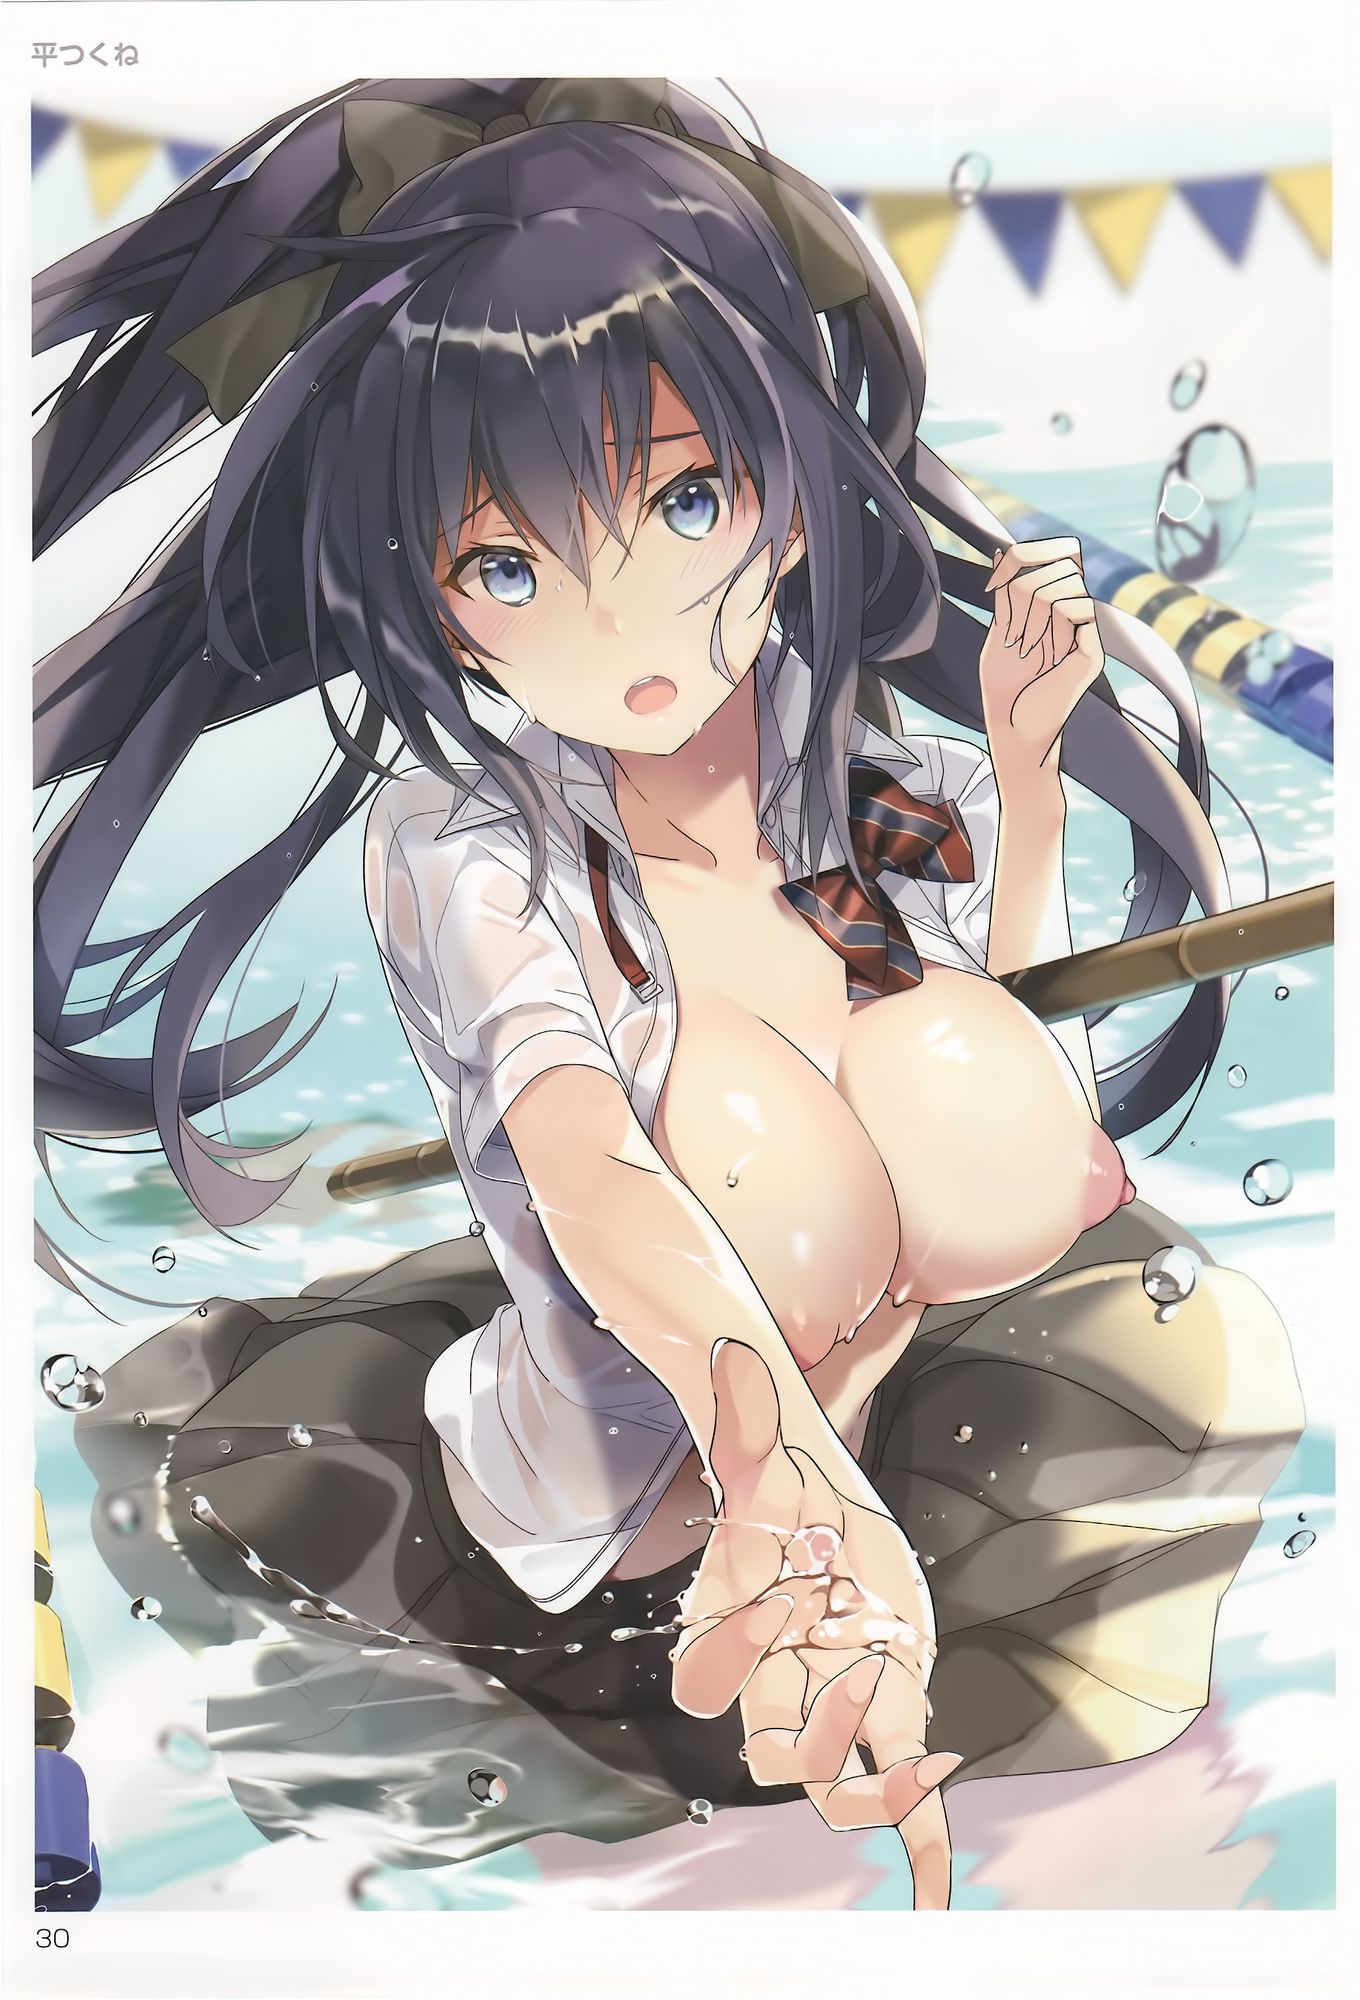 [Secondary/ZIP] wet transparent beautiful girl image that I see underwear or skin wet clothes 7